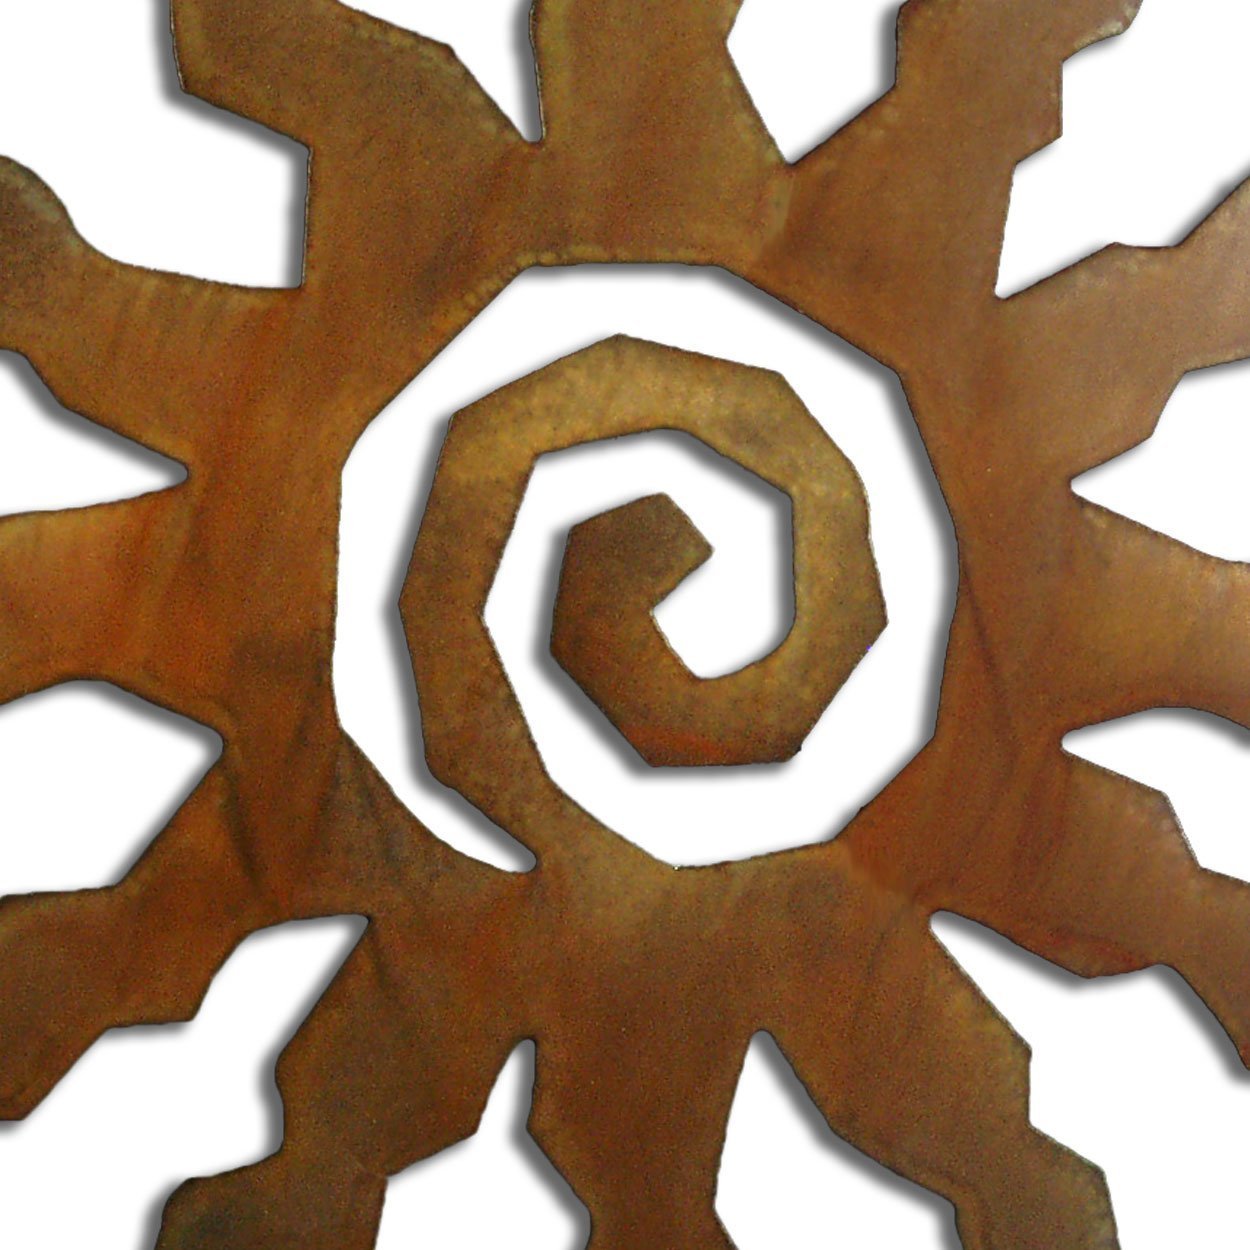 165154 - 30-inch extra large 12-Point Spiral Sunburst 3D Metal Wall Art in a rich rust finish